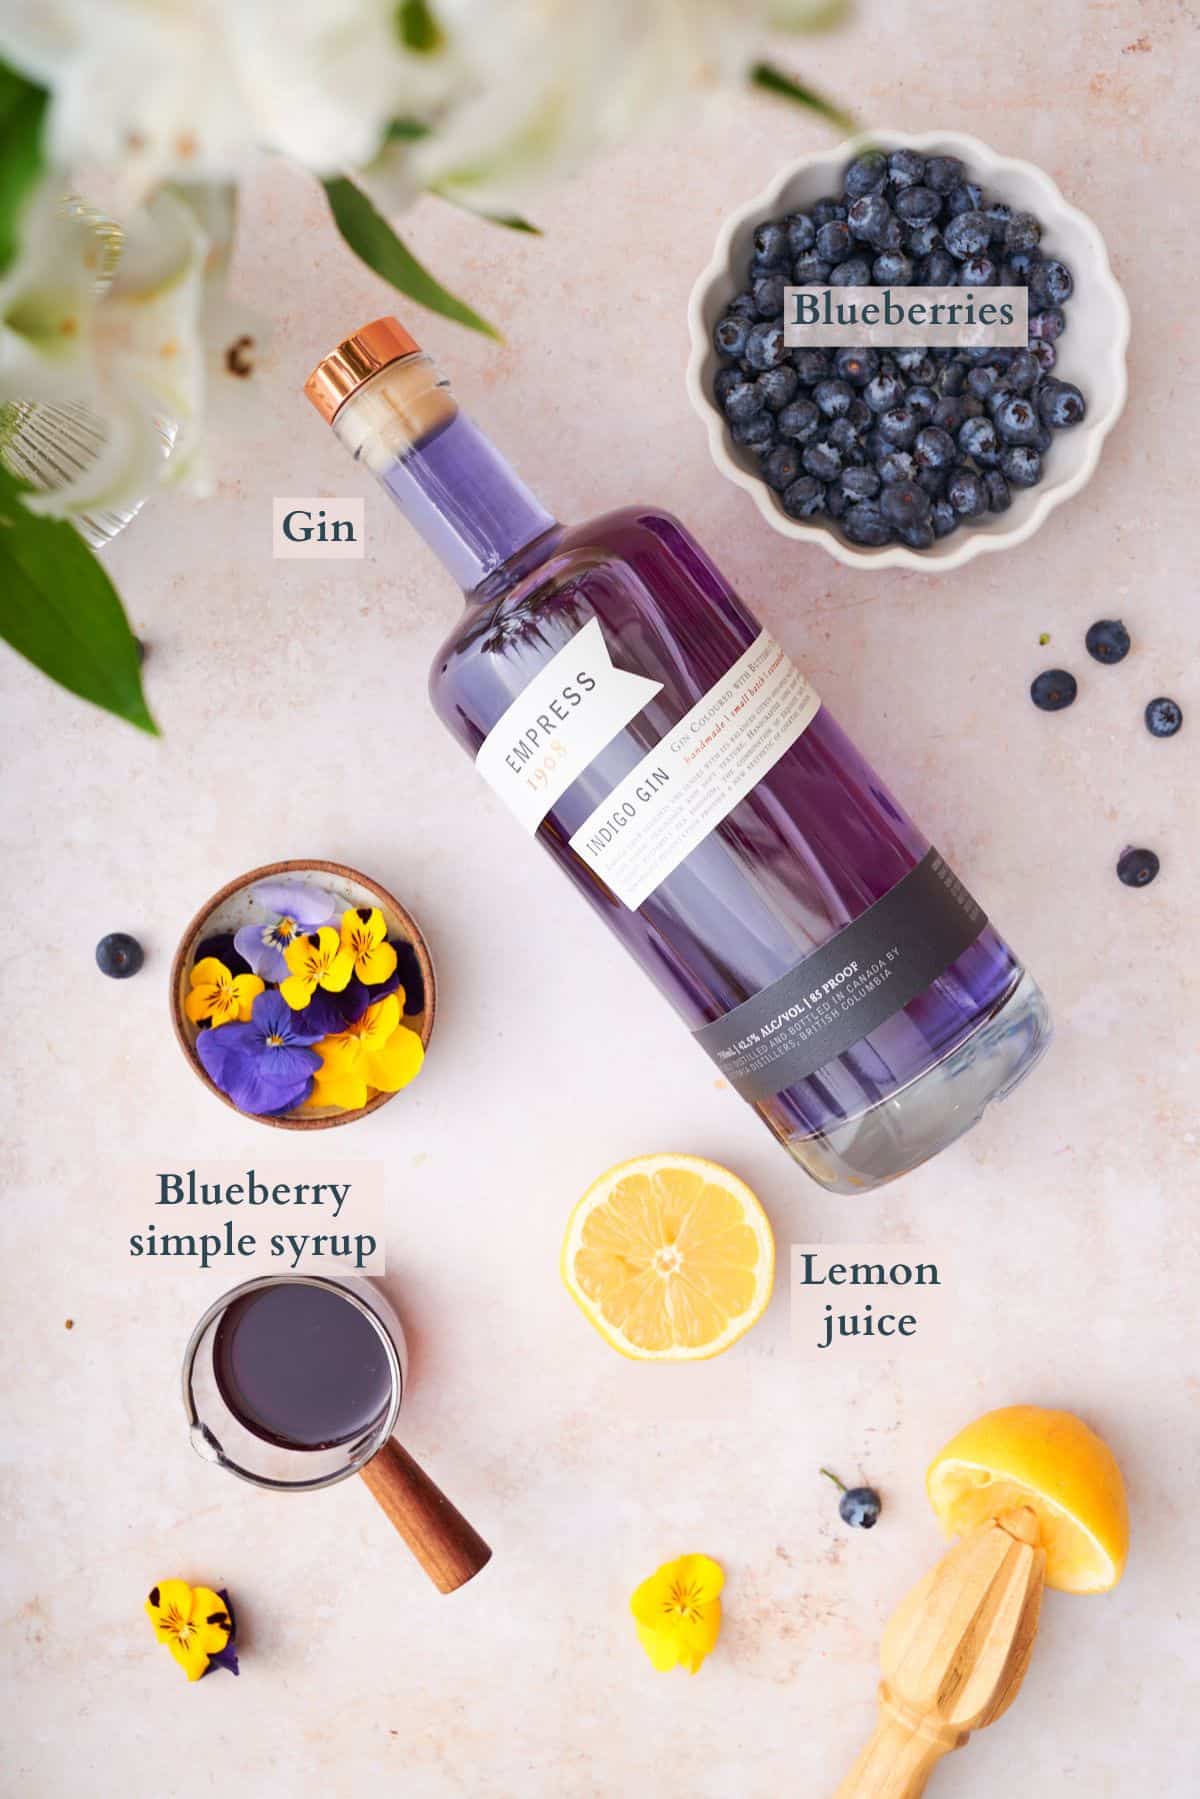 blueberry gin cocktail ingredients graphic, with items laid out in small bowls labeled to denote each ingredient. 